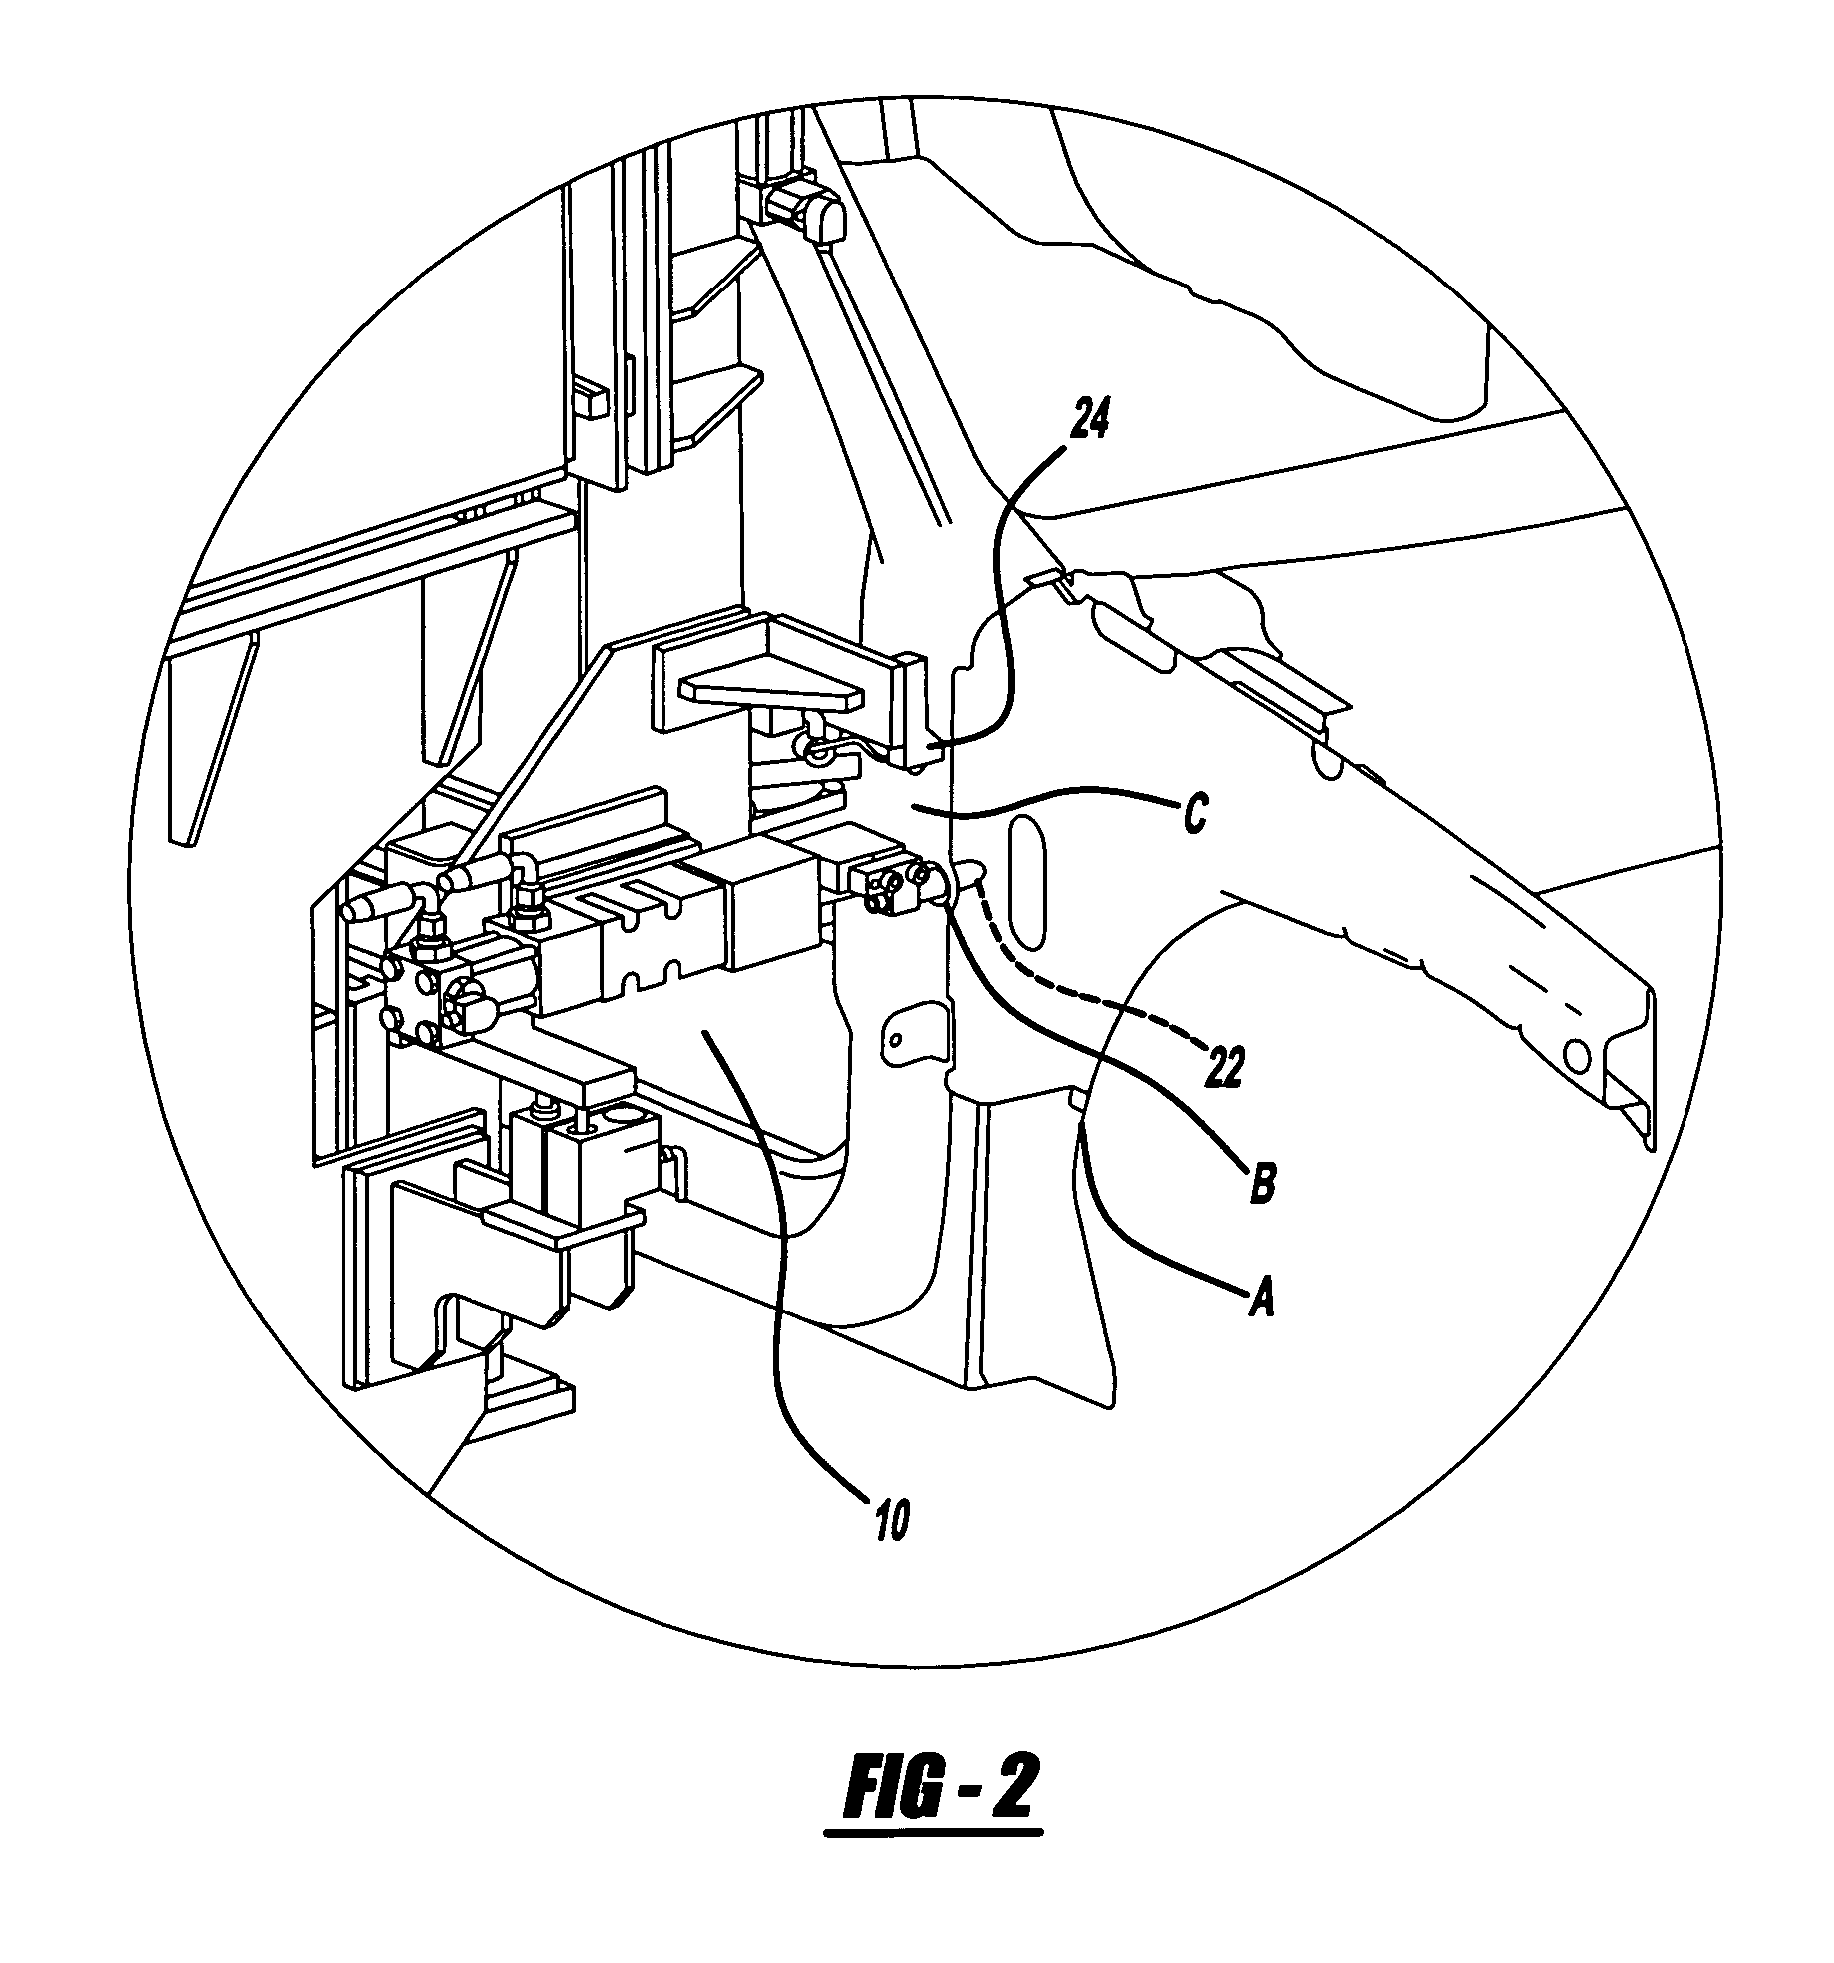 Method and apparatus for assembling exterior automotive vehicle boby components onto an automotive vehicle boby